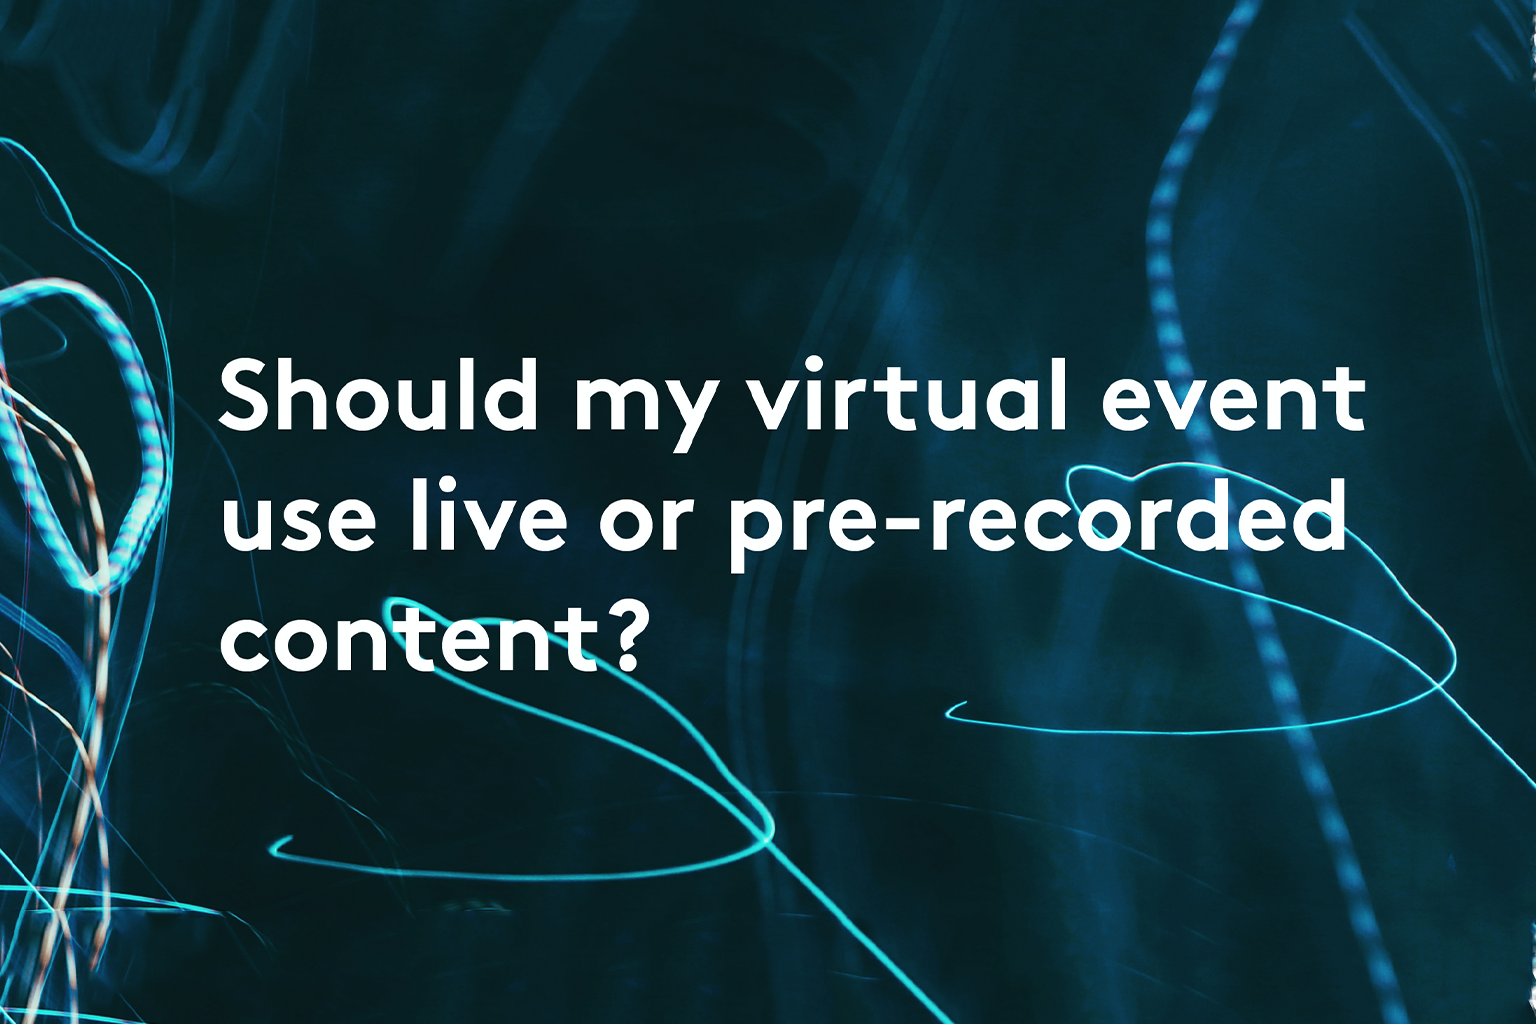 Should my virtual event use<br>live or pre-recorded content?